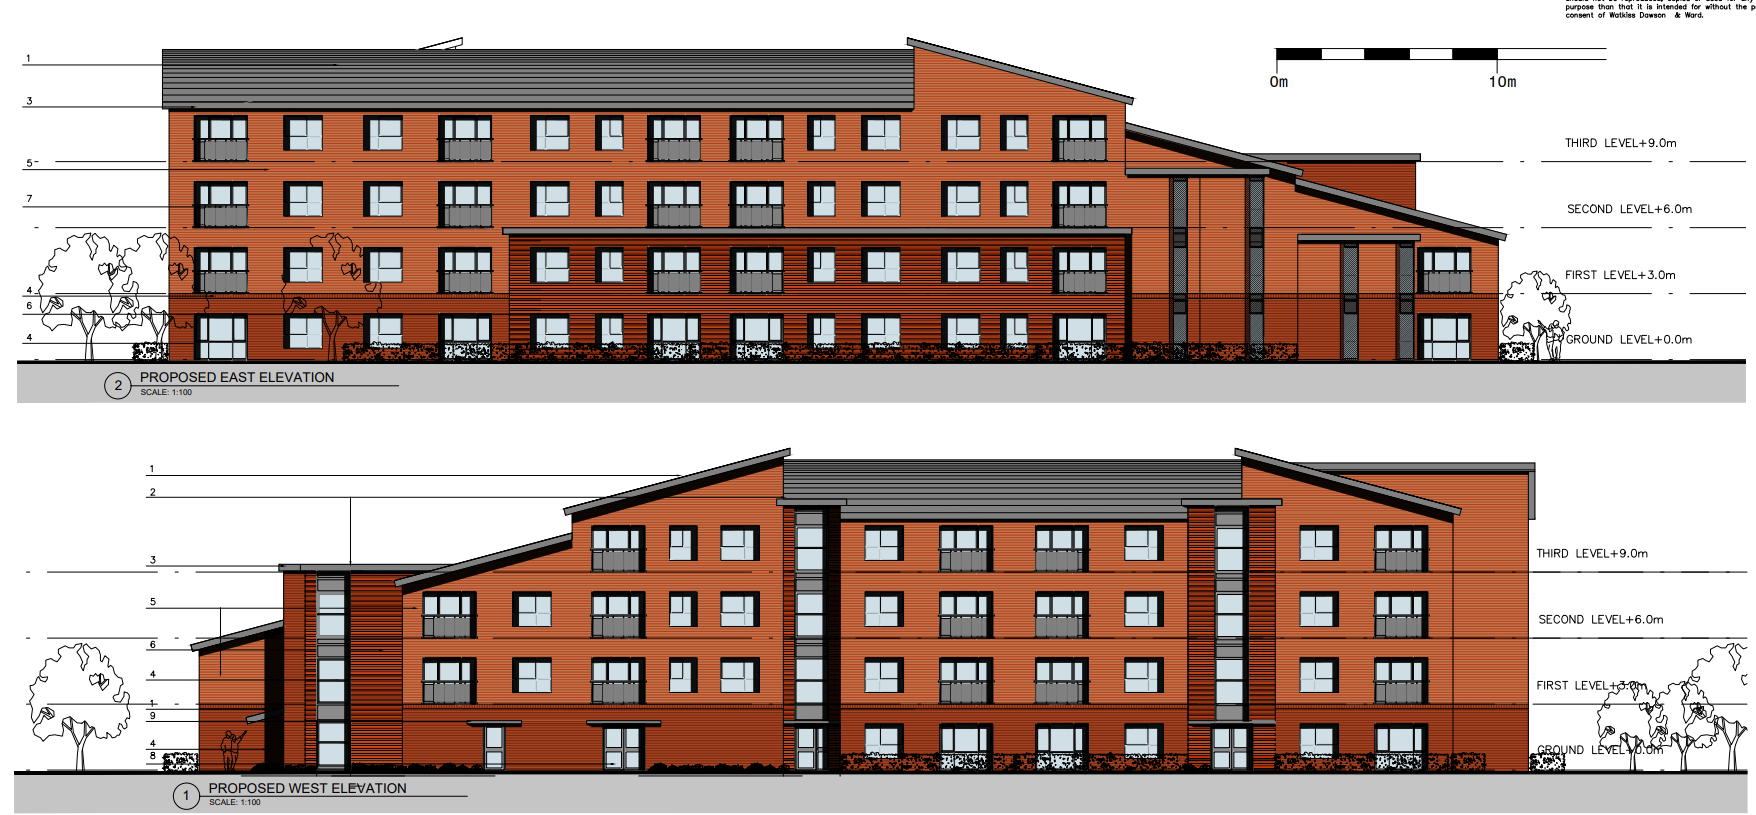 Plans submitted for 42 affordable apartments in Eccles